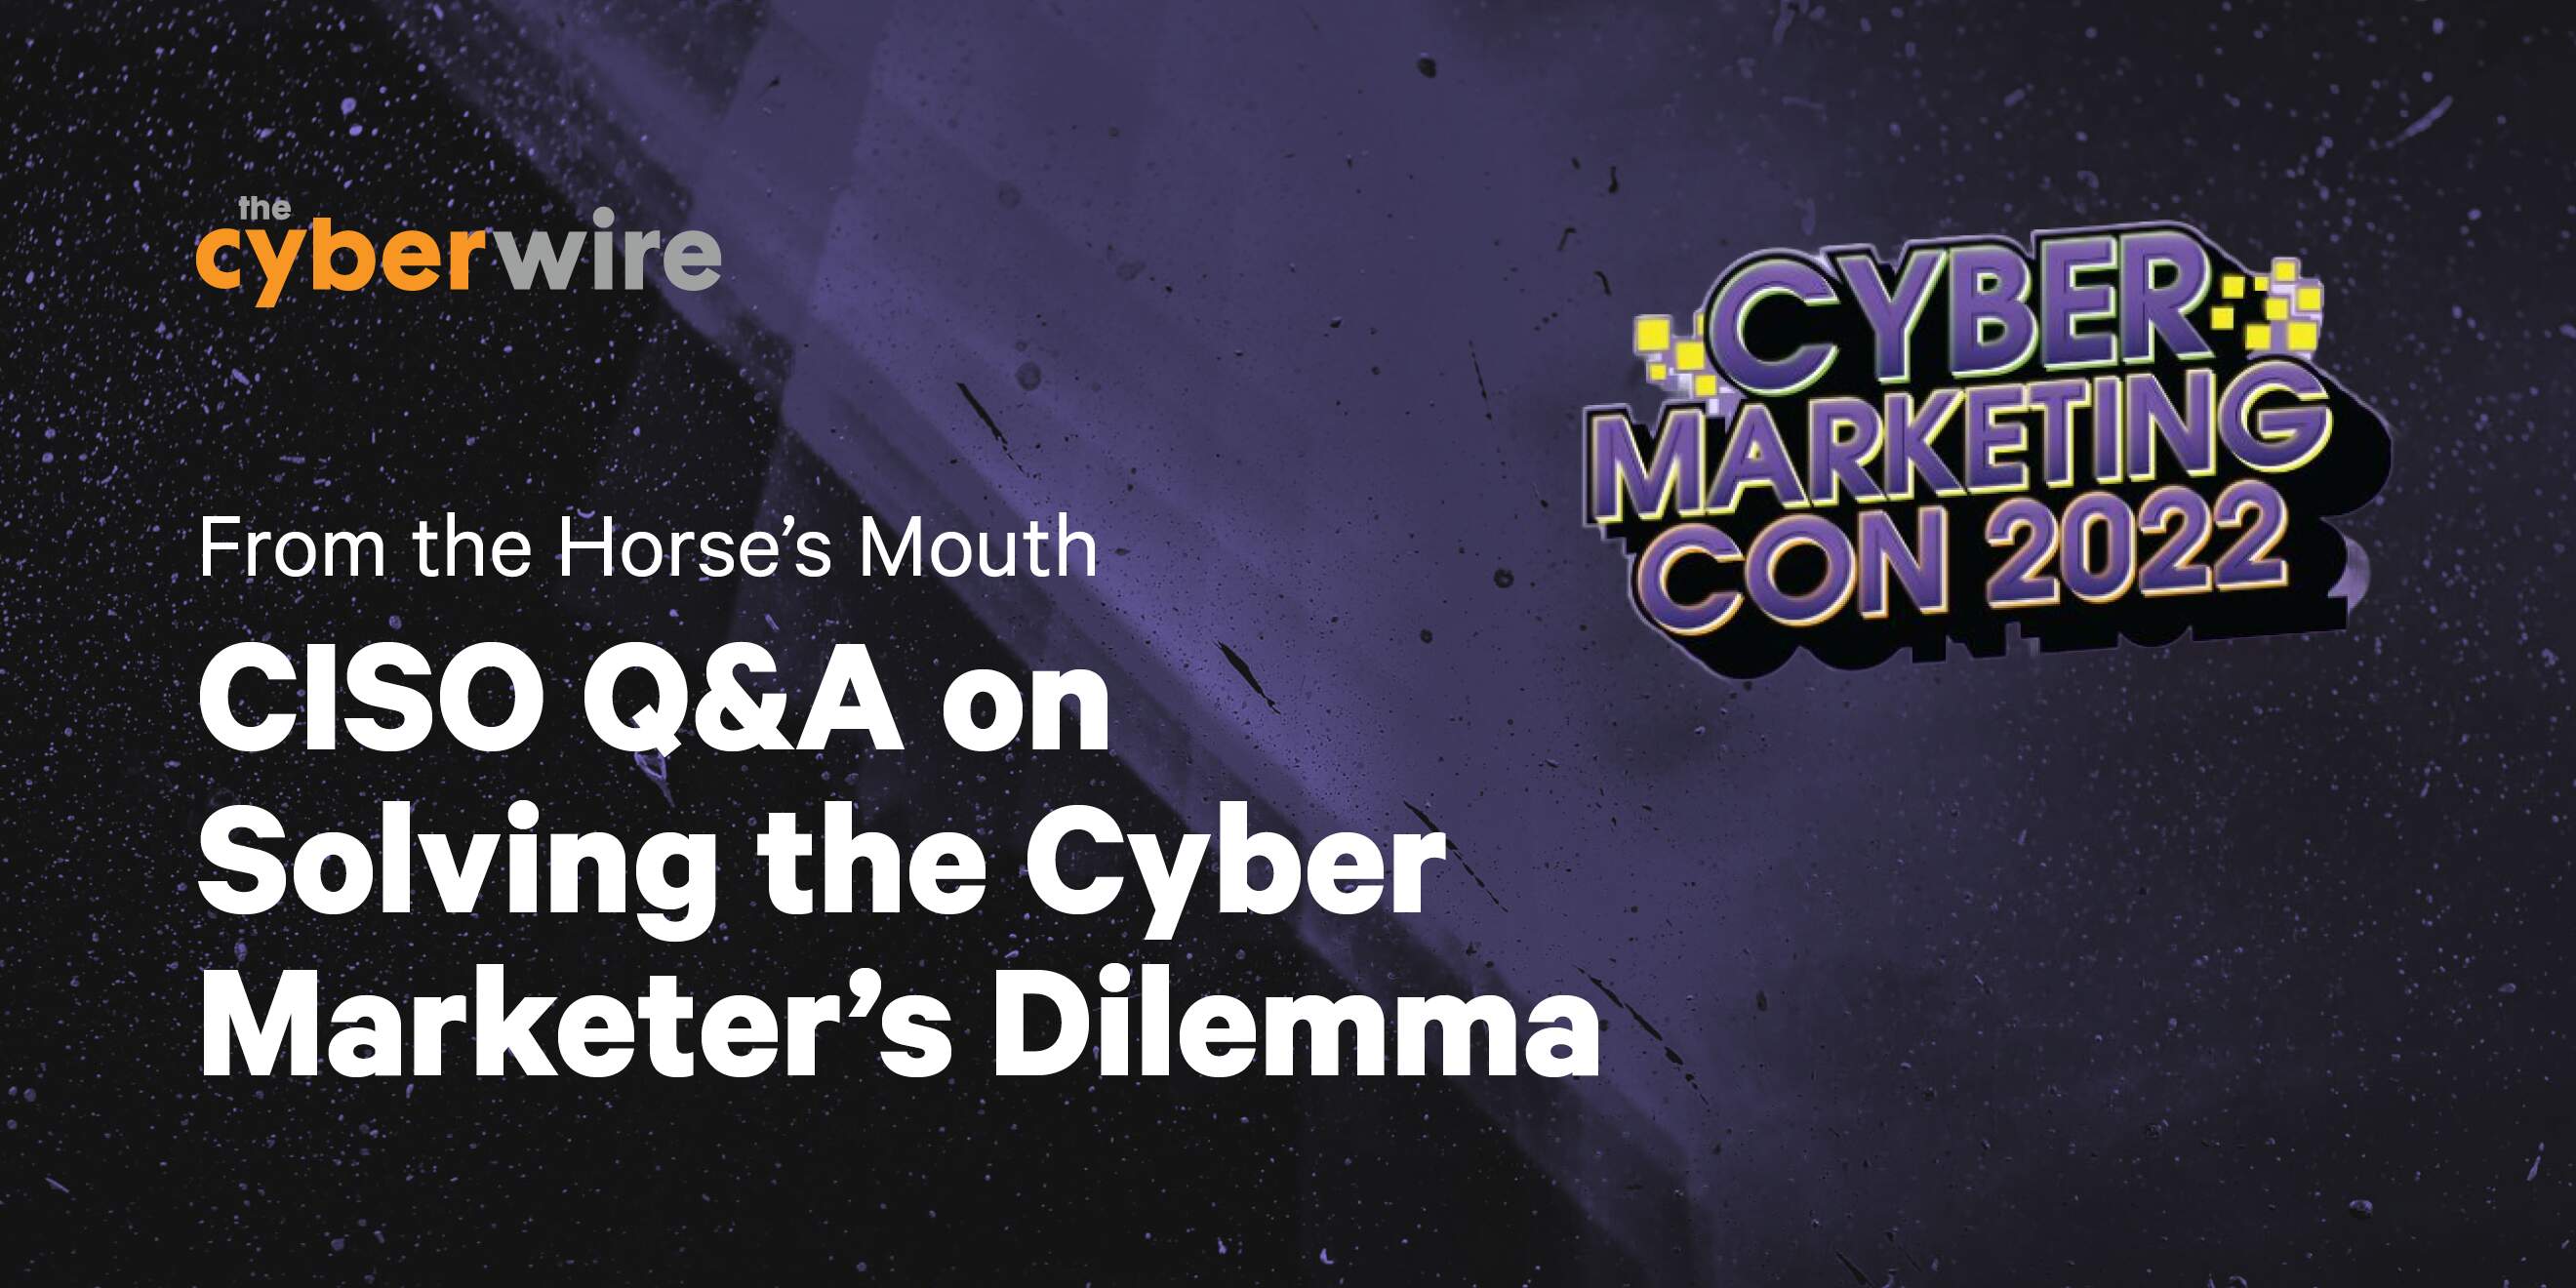 Cyber Marketing Con 2022: From the horse’s mouth: CISO Q&A on solving the cyber marketer’s dilemma.